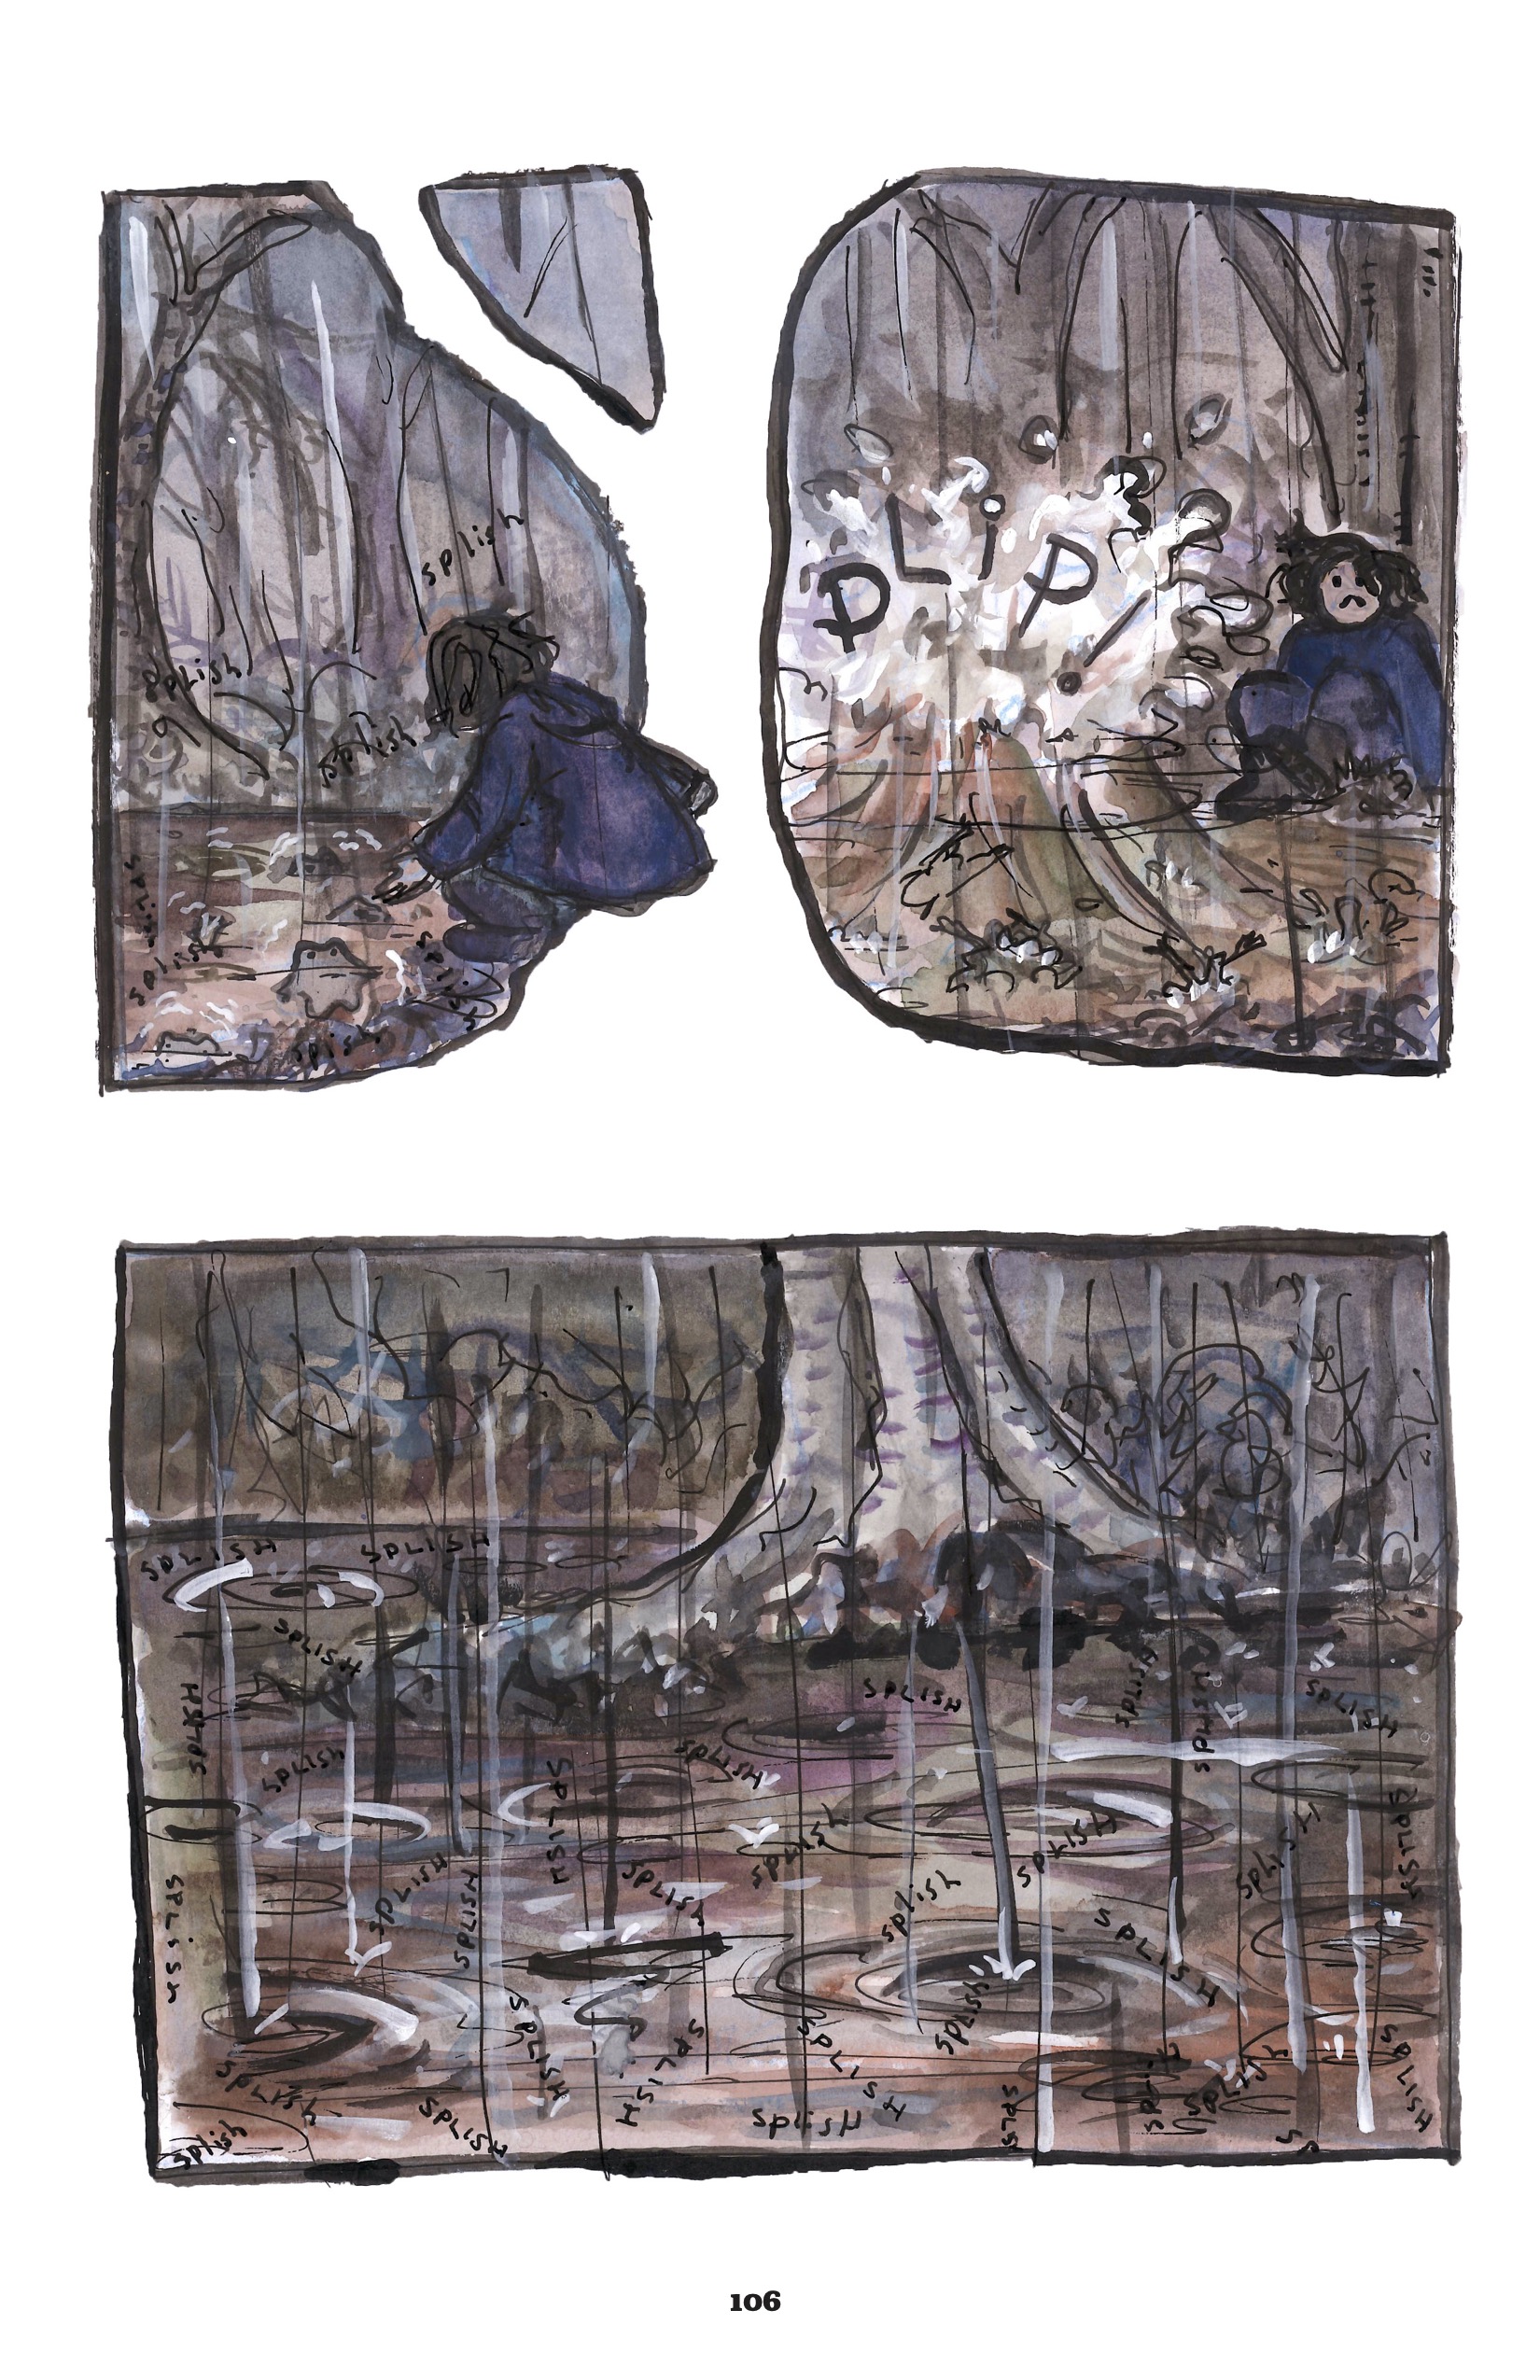 The page returns to purple and blue overtones. This page has a similar layout to the others - divided in half horizontally - but the top panel is fragmented into three. The negative space of the gutters is shaped like a tree trunk and a branch. In the leftmost panel, the figure is crouching down over the little pond and frogs, back to the reader. In the right, the figure, now facing the reader, has backed away slightly from the pond, from which a huge splash of water rises with a “PLIIP!” The figure is frowning, looking a bit taken aback. In the lower half, we return to a shot of just the water, which is now empty of frogs, who disappeared and left only ripples in their wake. The roots and base trunk of a tree rise out of the water in the background; it is still raining. There are even more splishes in this panel.